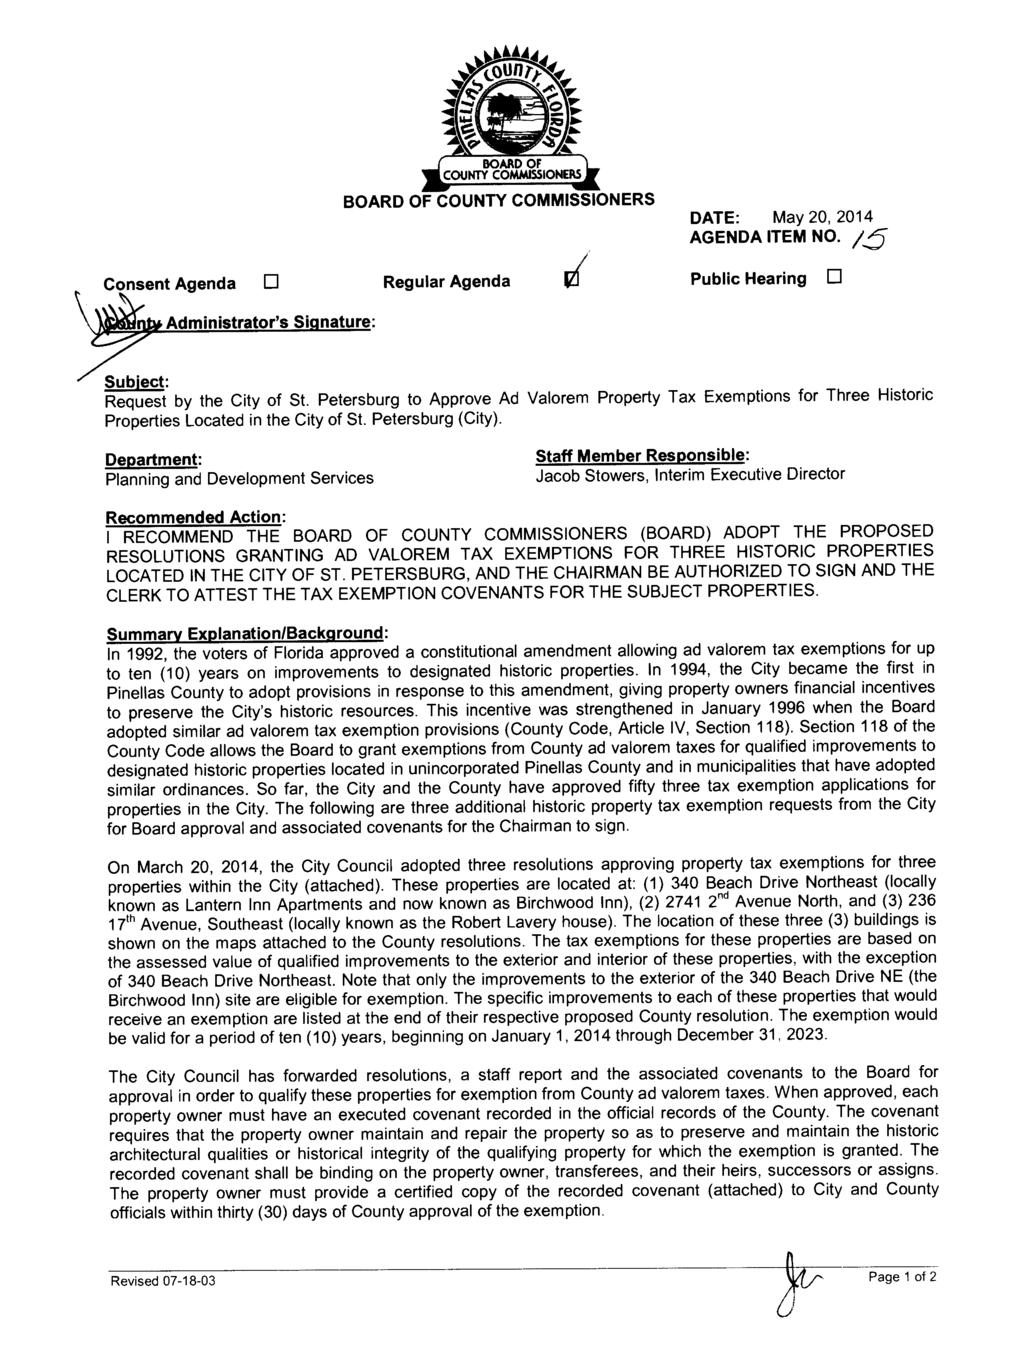 BOARD OF COUNTY COMMISSIONERS DATE: May 20, 2014 AGENDA ITEM NO. /..5 ConsentAgenda 0 Regular Agenda Public Hearing 0 Subject: Request by the City of St.